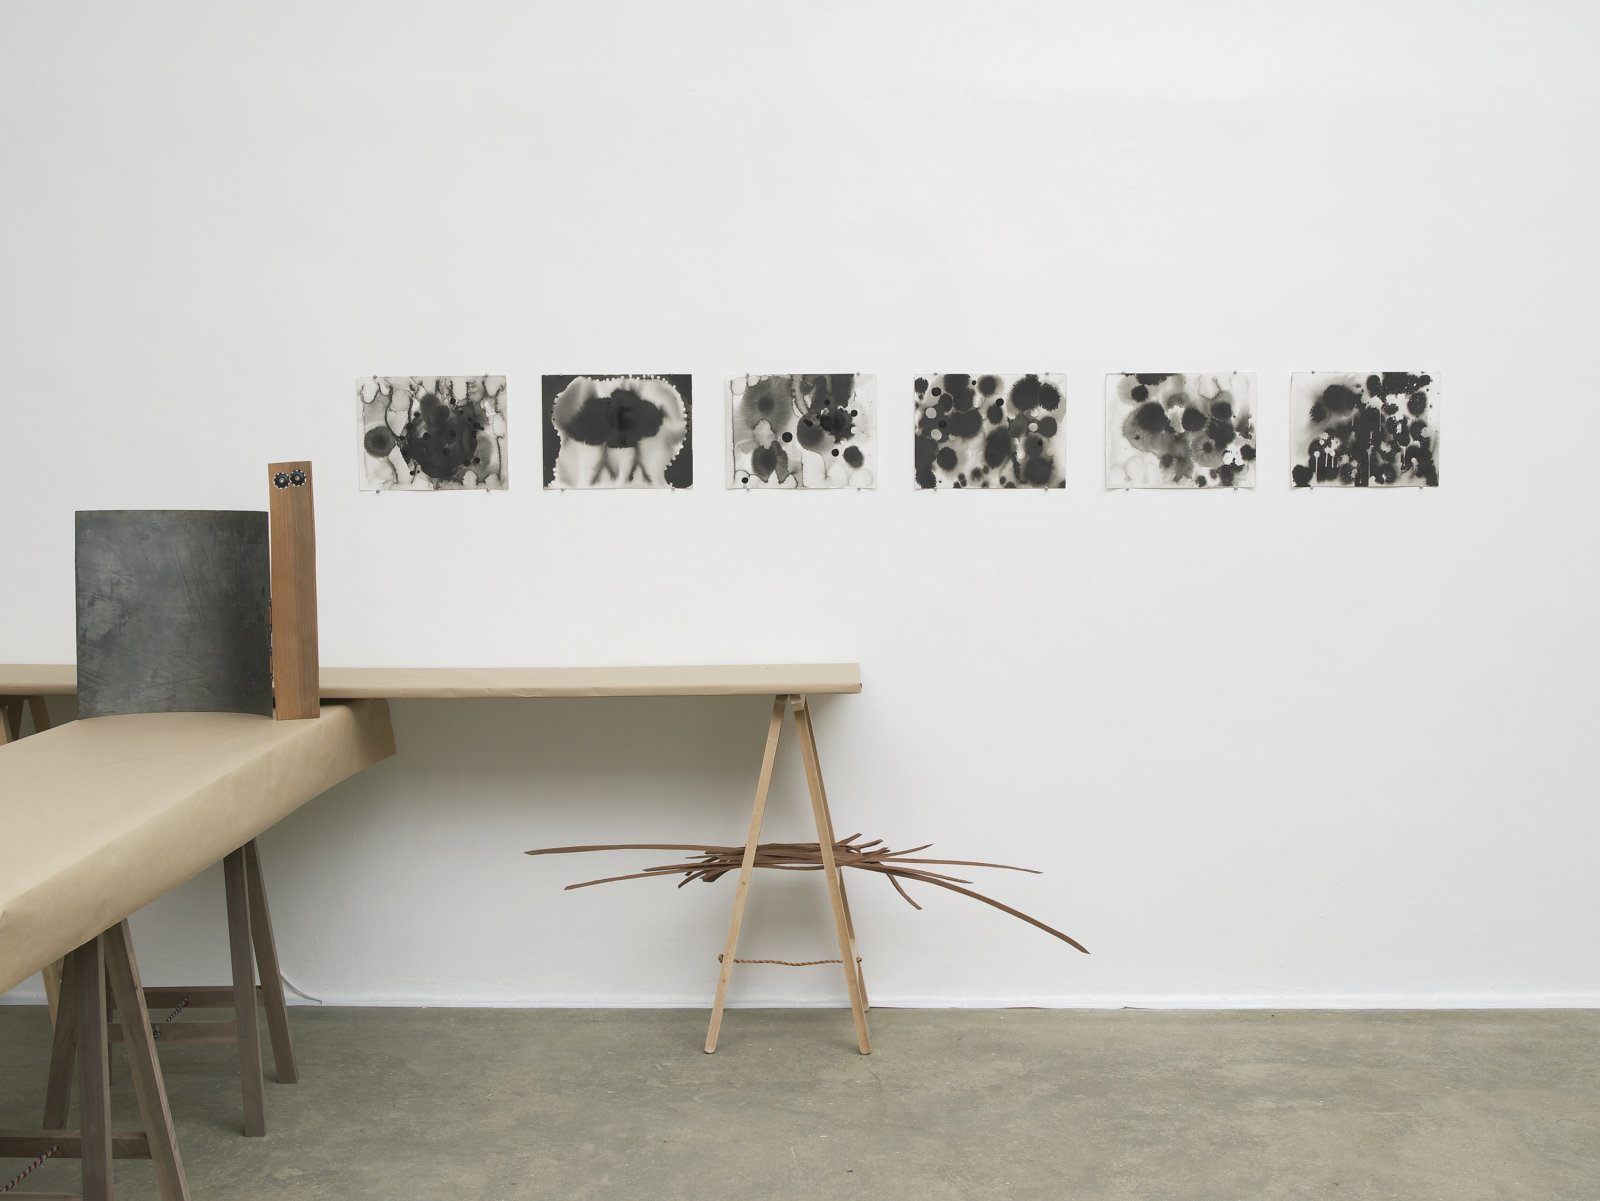 Christina Mackie, Studies for Explosions, 2011, indian ink on paper, dimensions variable. Installation view, Painting the Weights, Chisenhale Gallery, London, UK, 2012